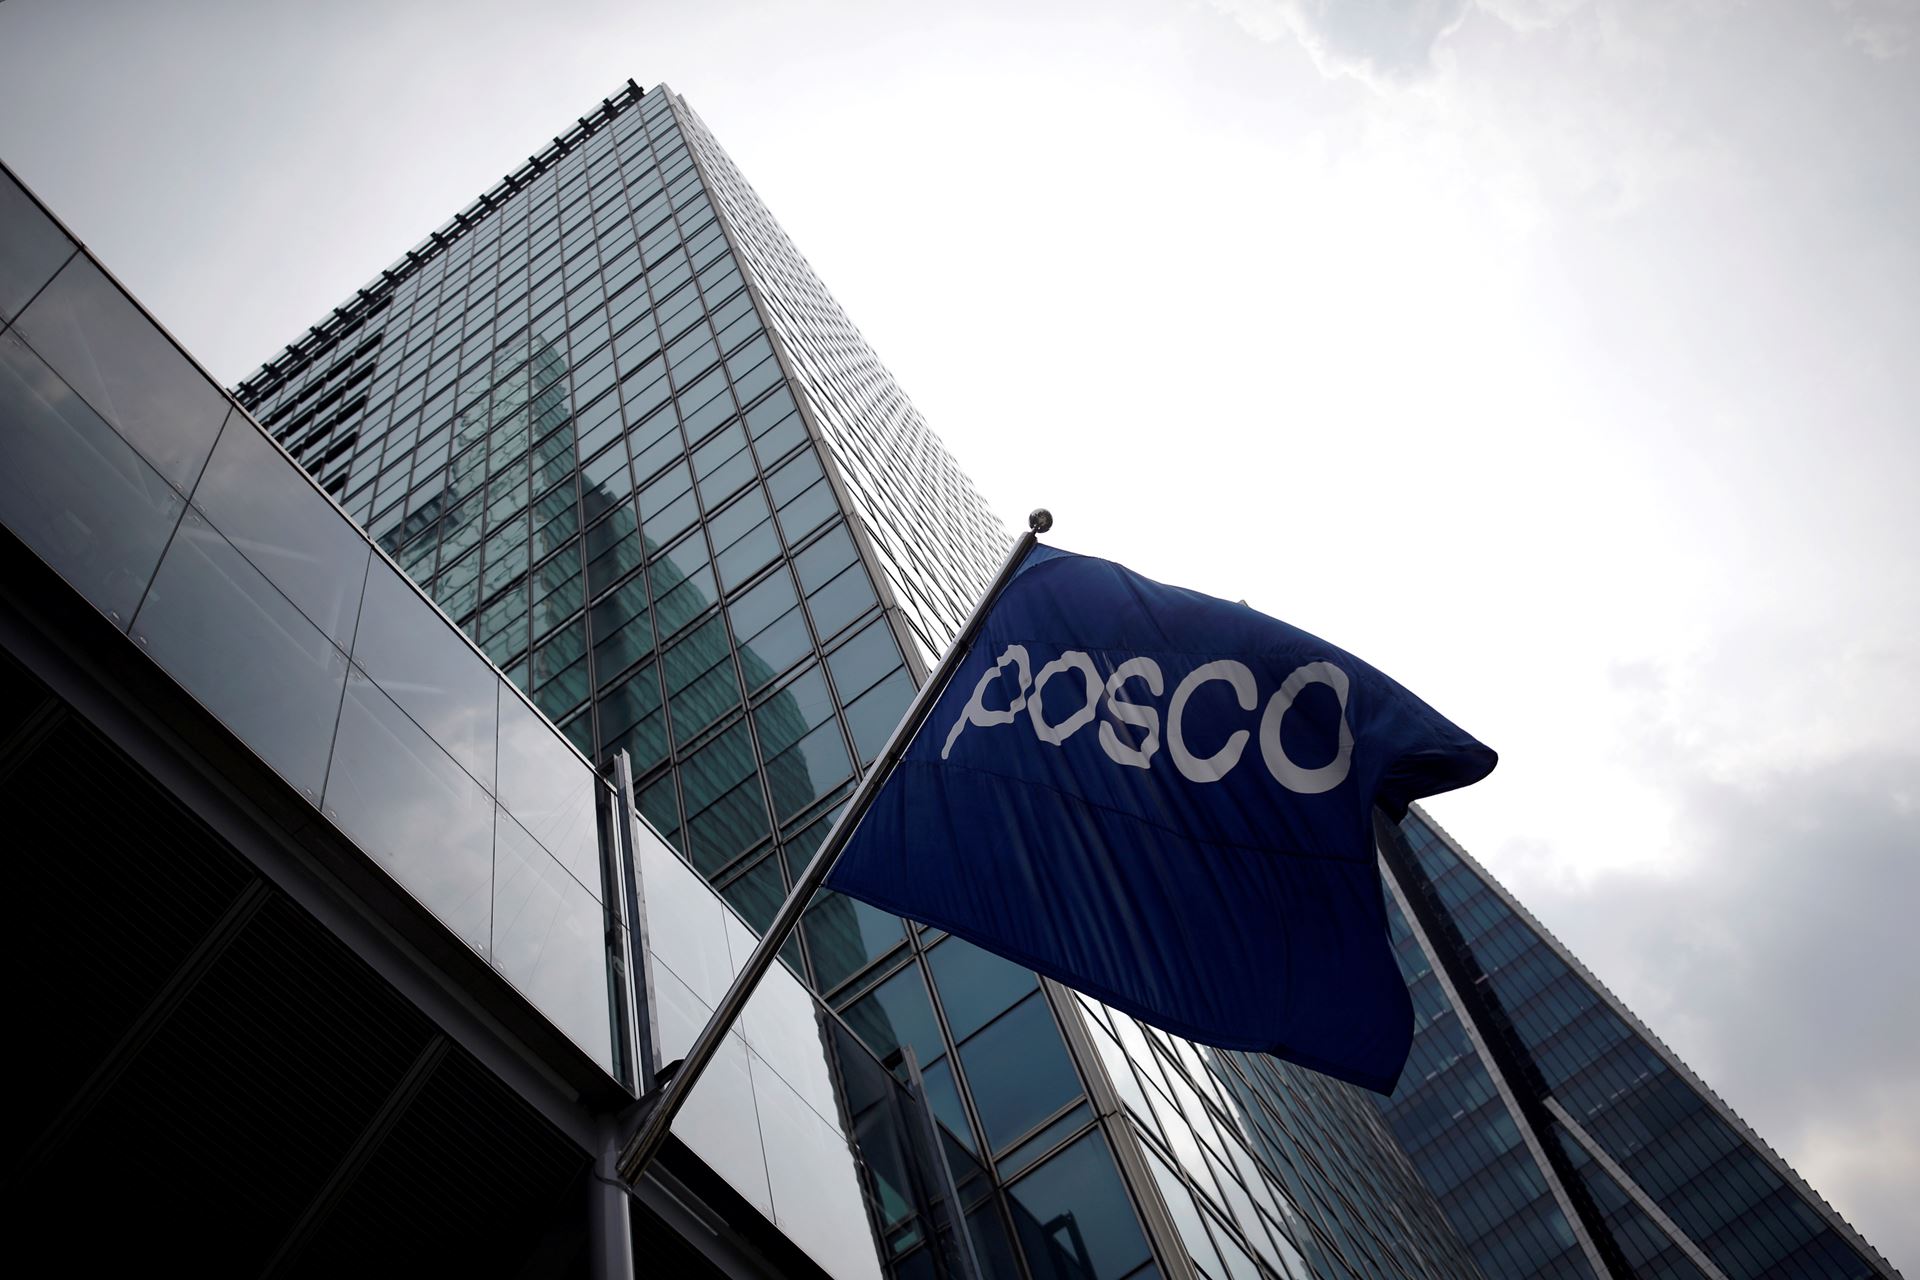 POSCO to launch the production of green steel by 2030